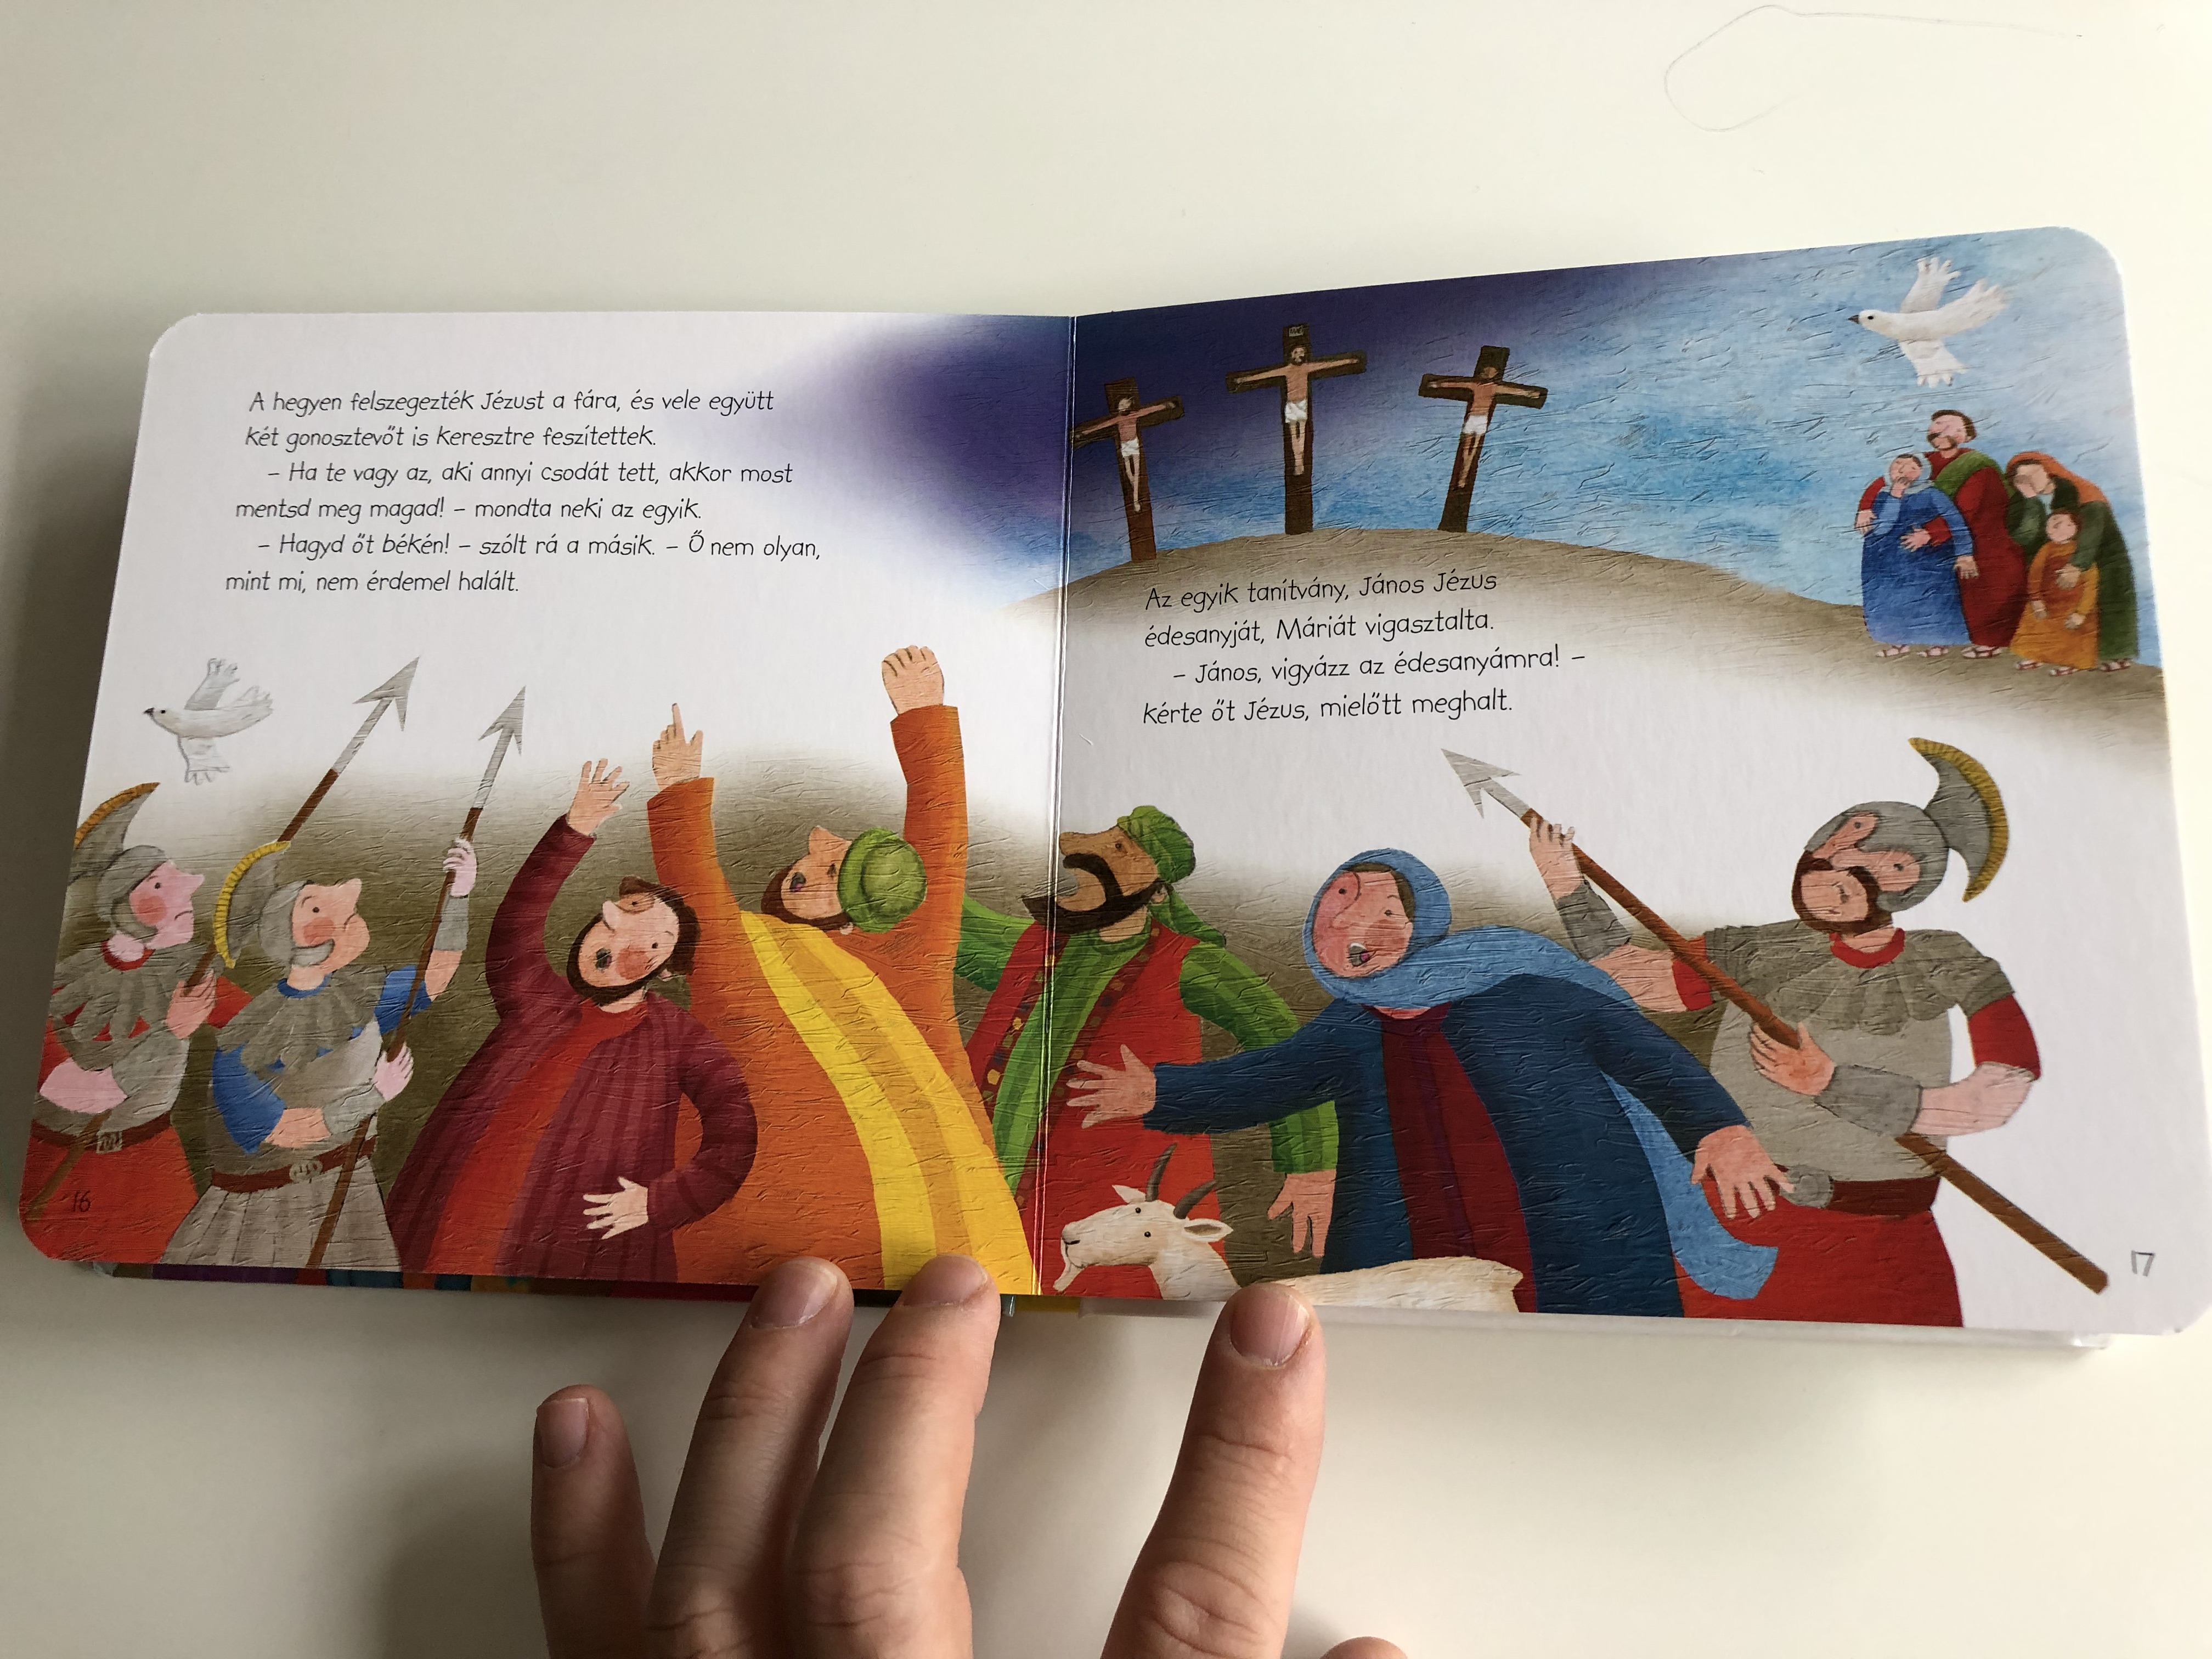 kir-ly-szam-rh-ton-by-bethan-james-k-llai-nagy-krisztina-hungarian-translation-of-the-miracle-of-easter-easter-mini-book-this-vibrant-retelling-of-the-easter-story-covers-biblical-events-from-palm-sunday-through-to-after-je-7274615-.jpg